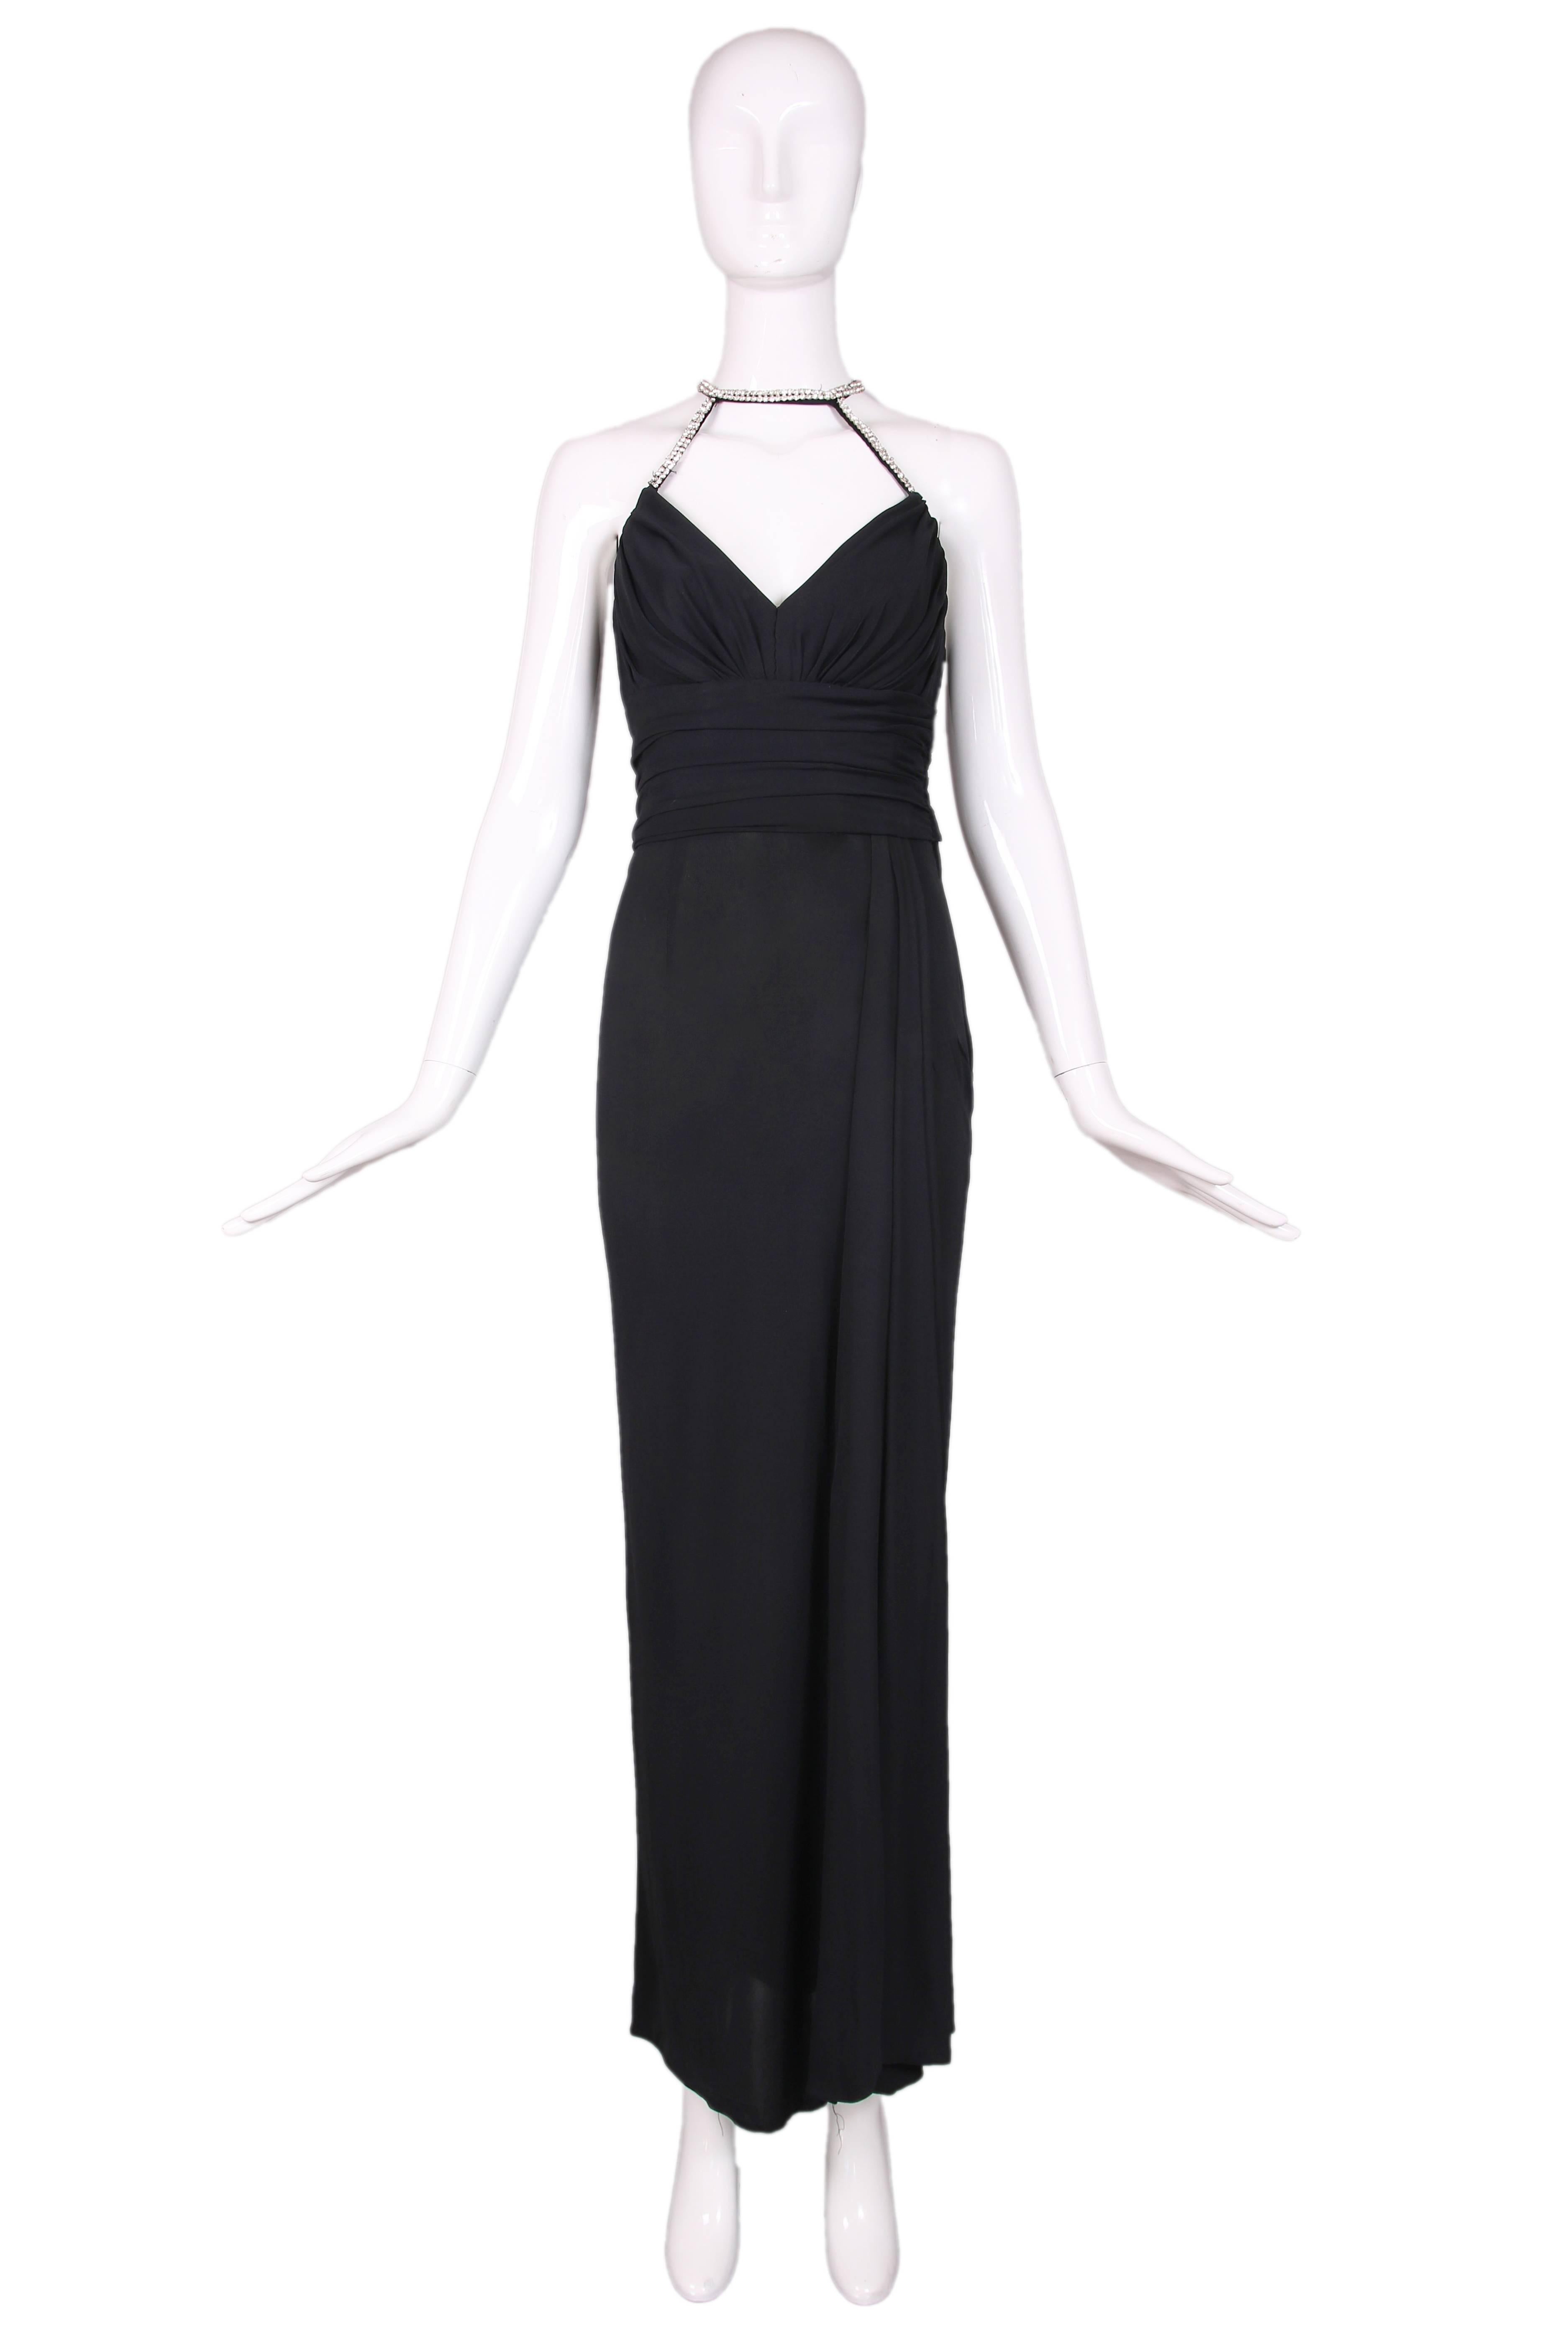 1998-1999 A/H Chanel black cotton jersey evening gown with rhinestone straps off sweetheart neckline that circle the neck and continue at back. Features slight side ruching at fitted waist and a draped panel just to the left of center front,